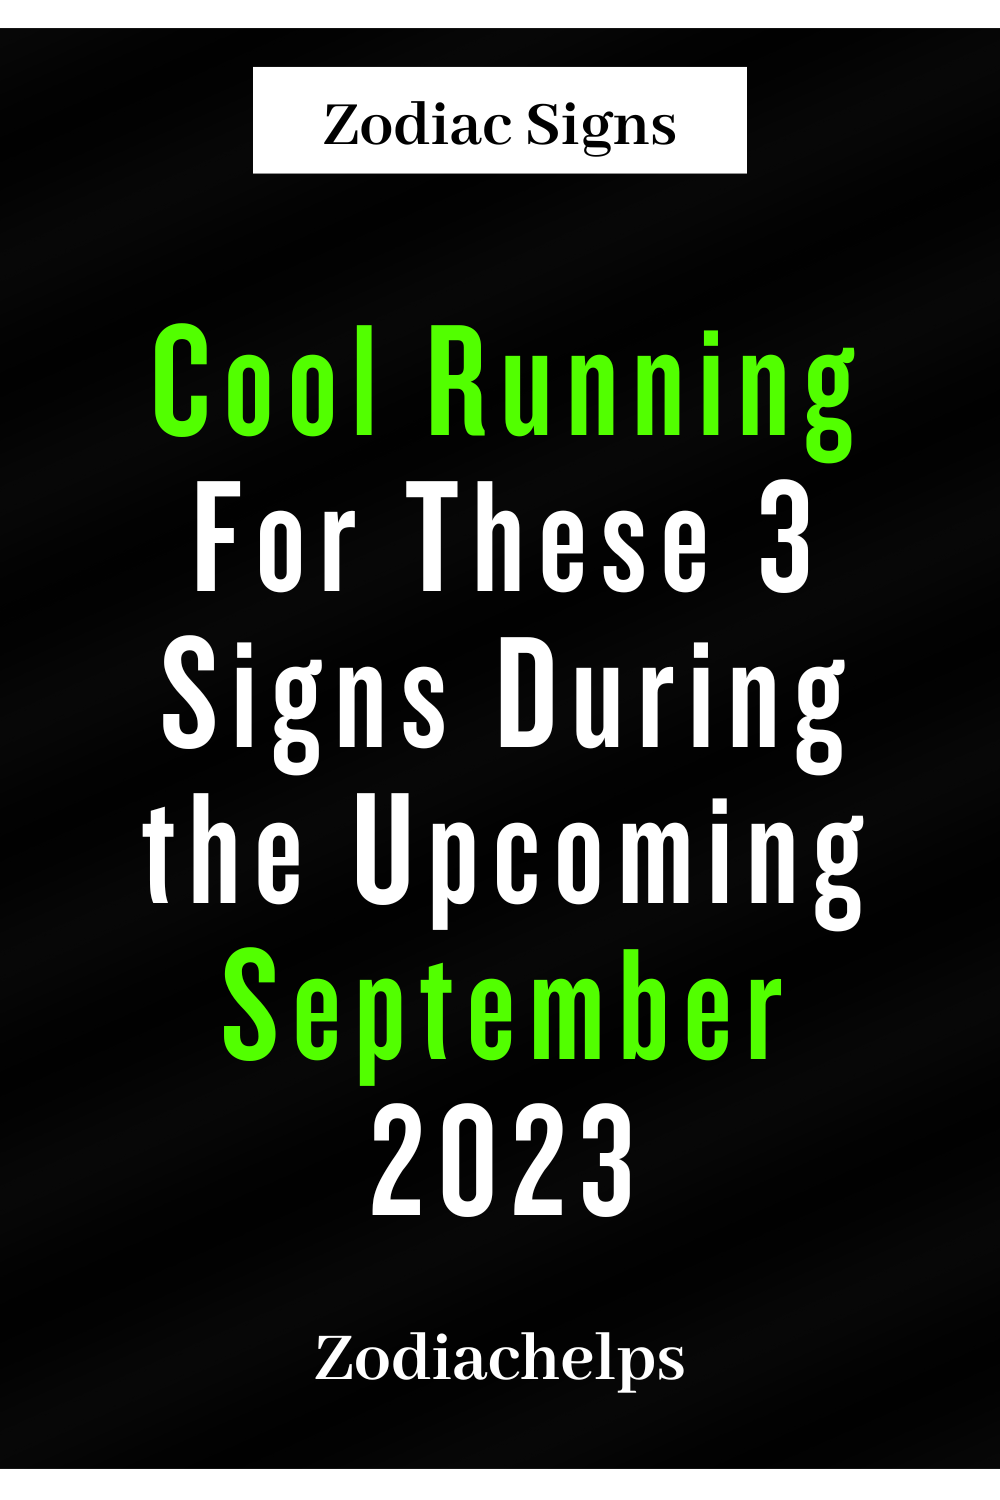 Cool Running For These 3 Signs During the Upcoming September 2023